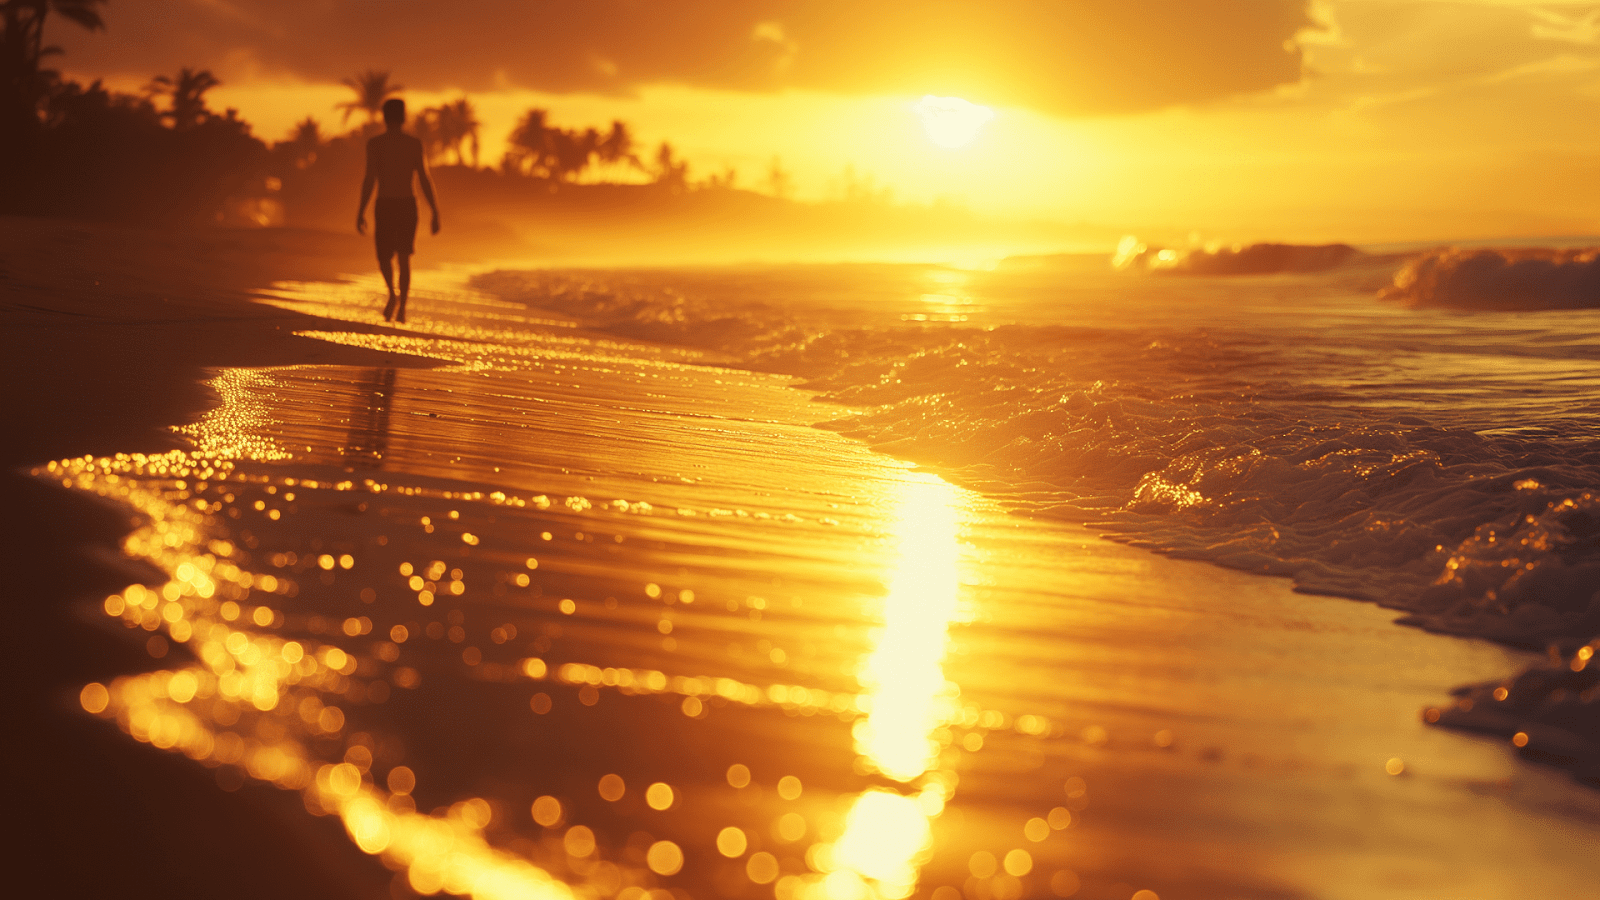 A man on a solitary walk along a golden-lit Bali beach at sunset, moments of peace